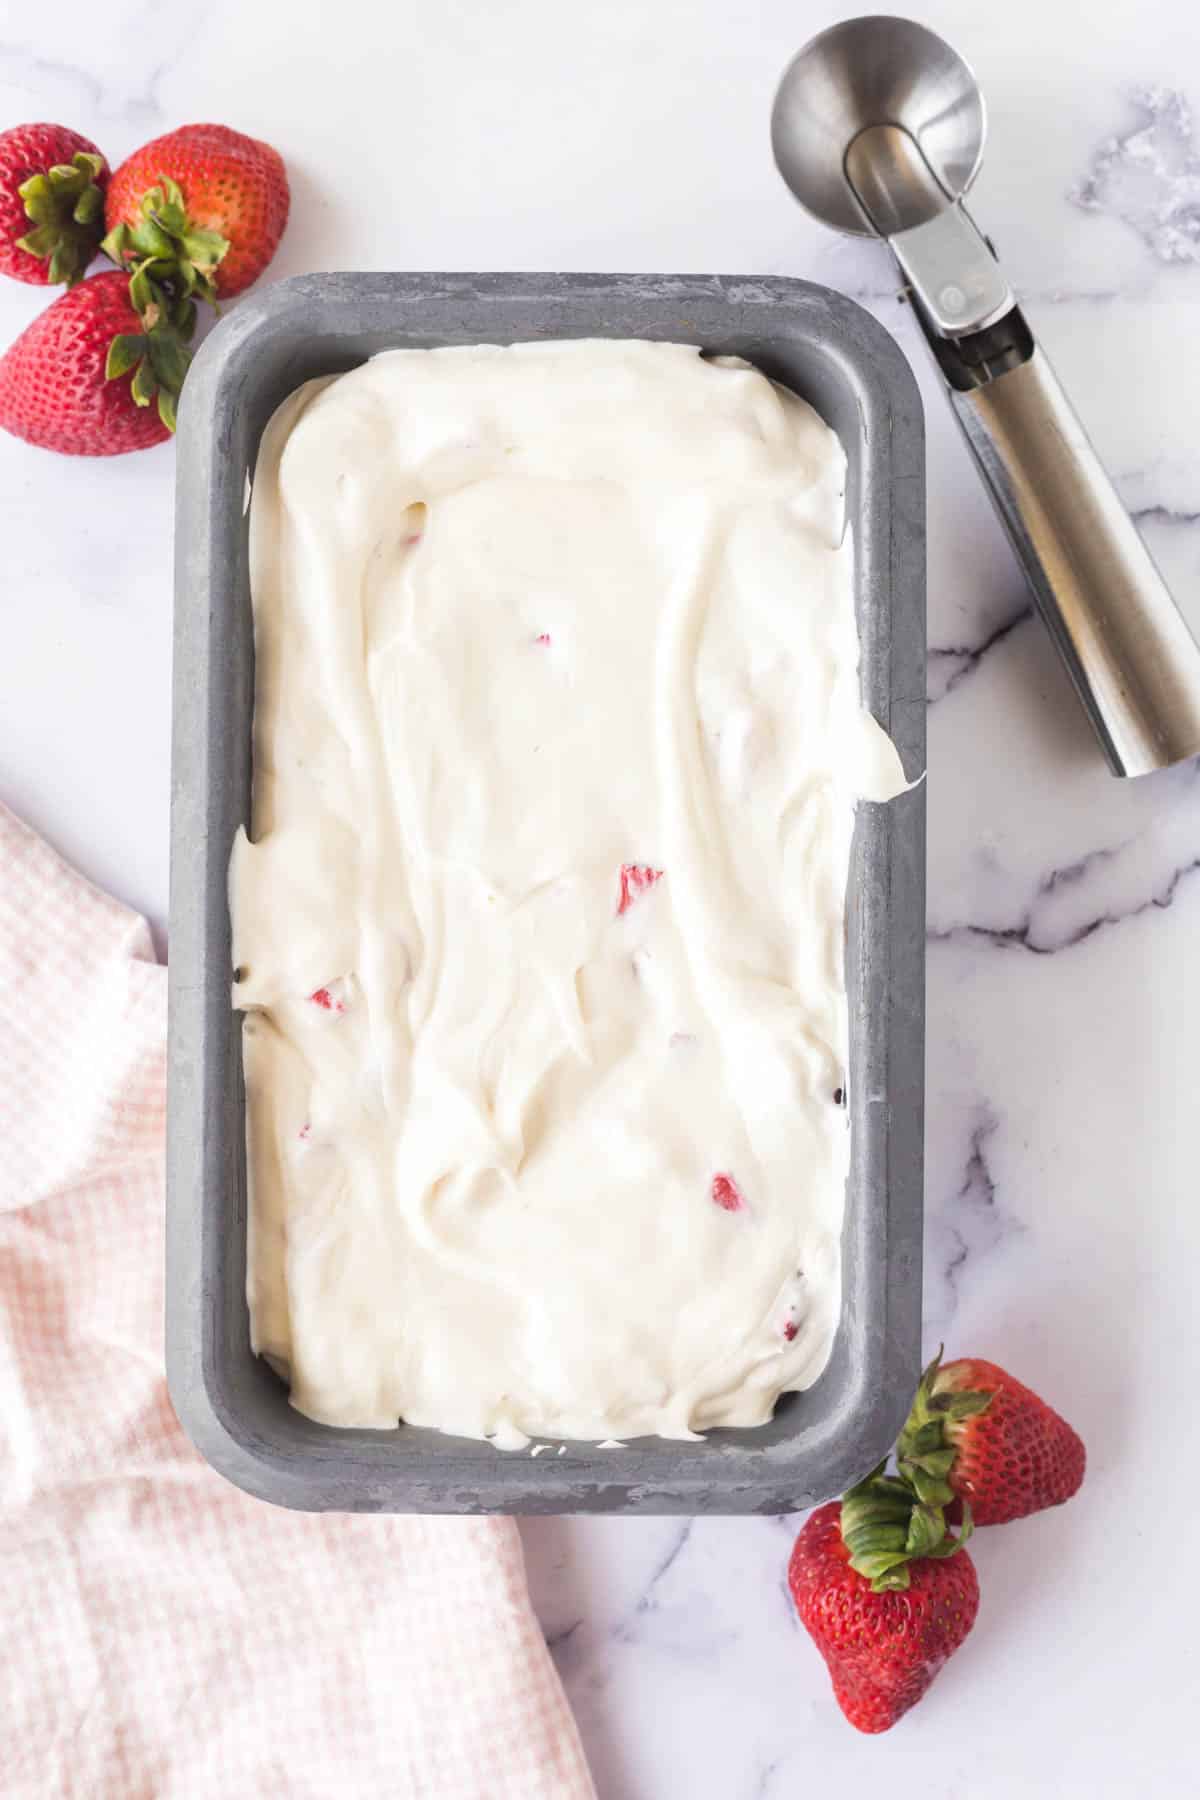 Frozen Strawberry Cheesecake Ice Cream in a loaf pan on a marble table with an ice cream scoop.